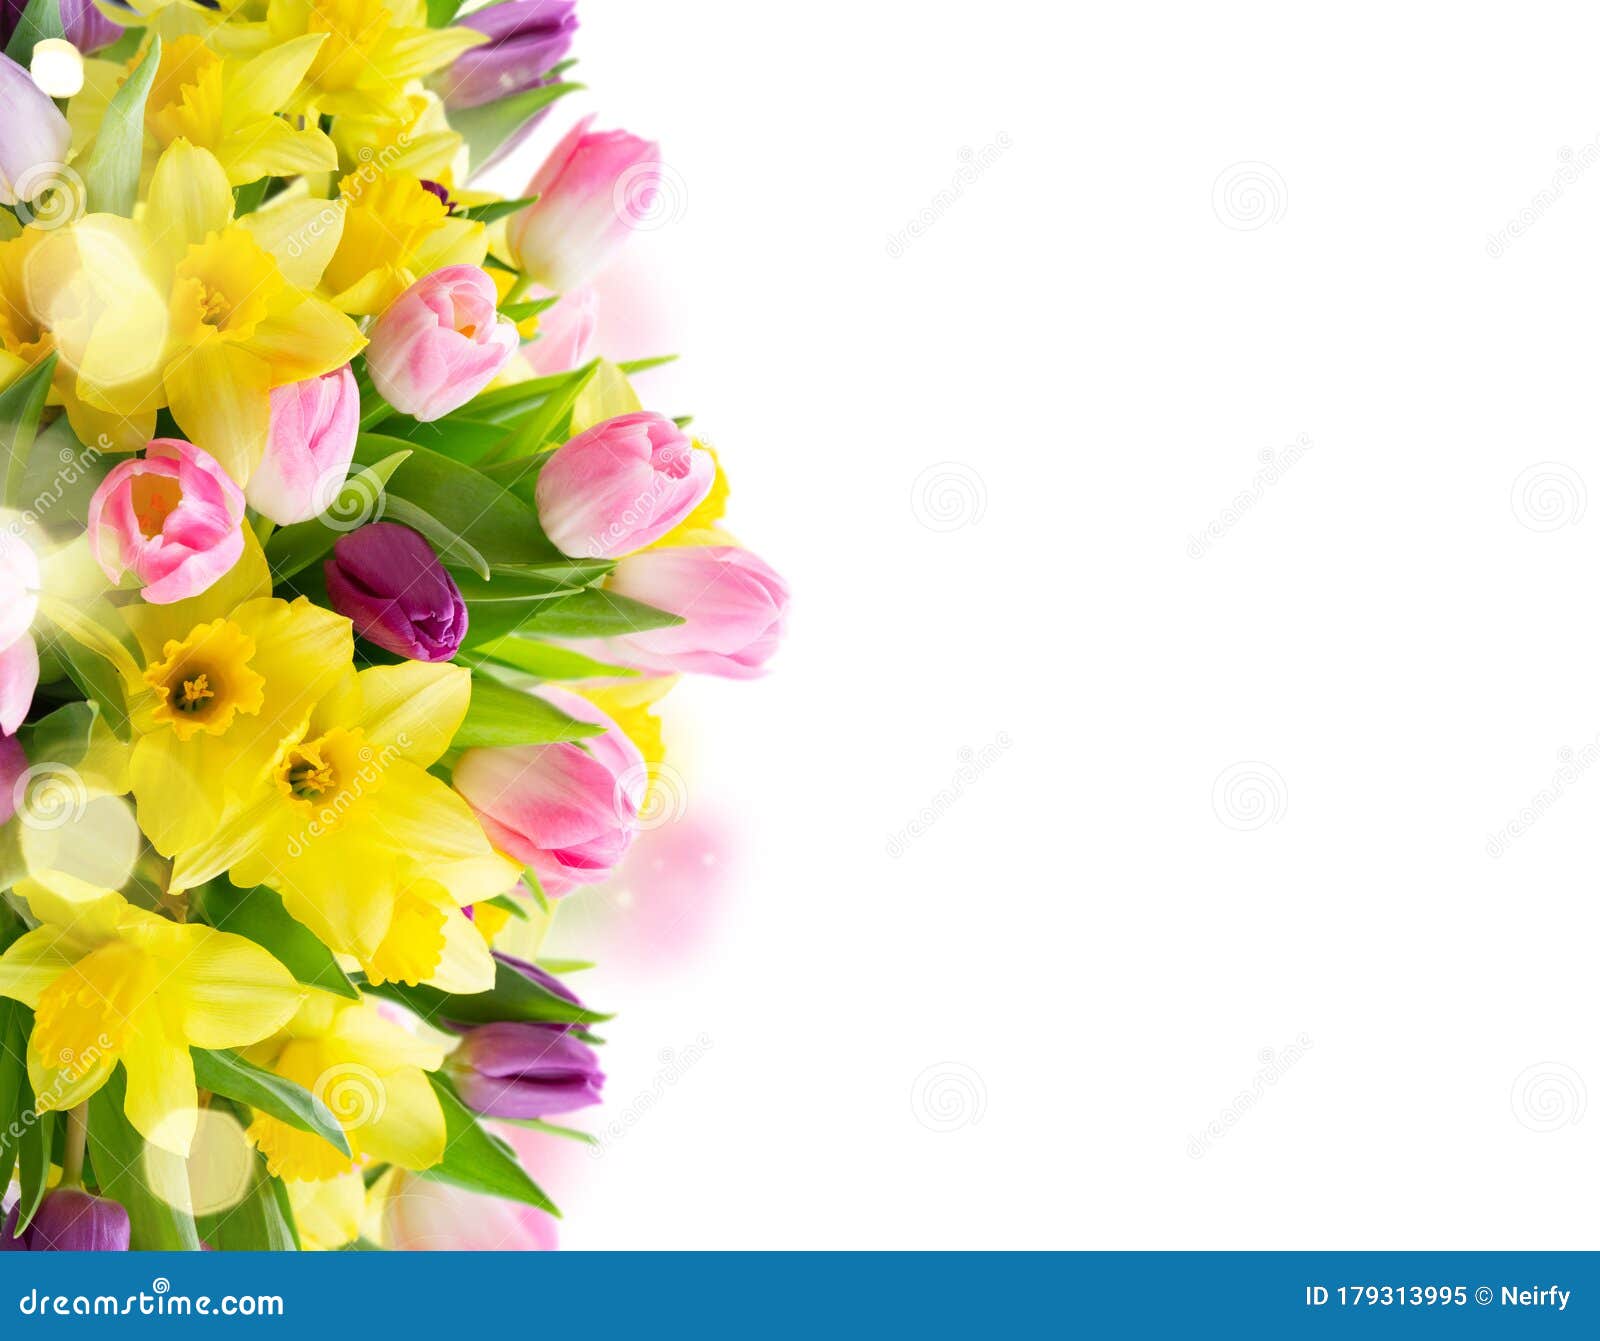 Tulips and Daffodils Flowers Stock Image - Image of mothers, isolated ...